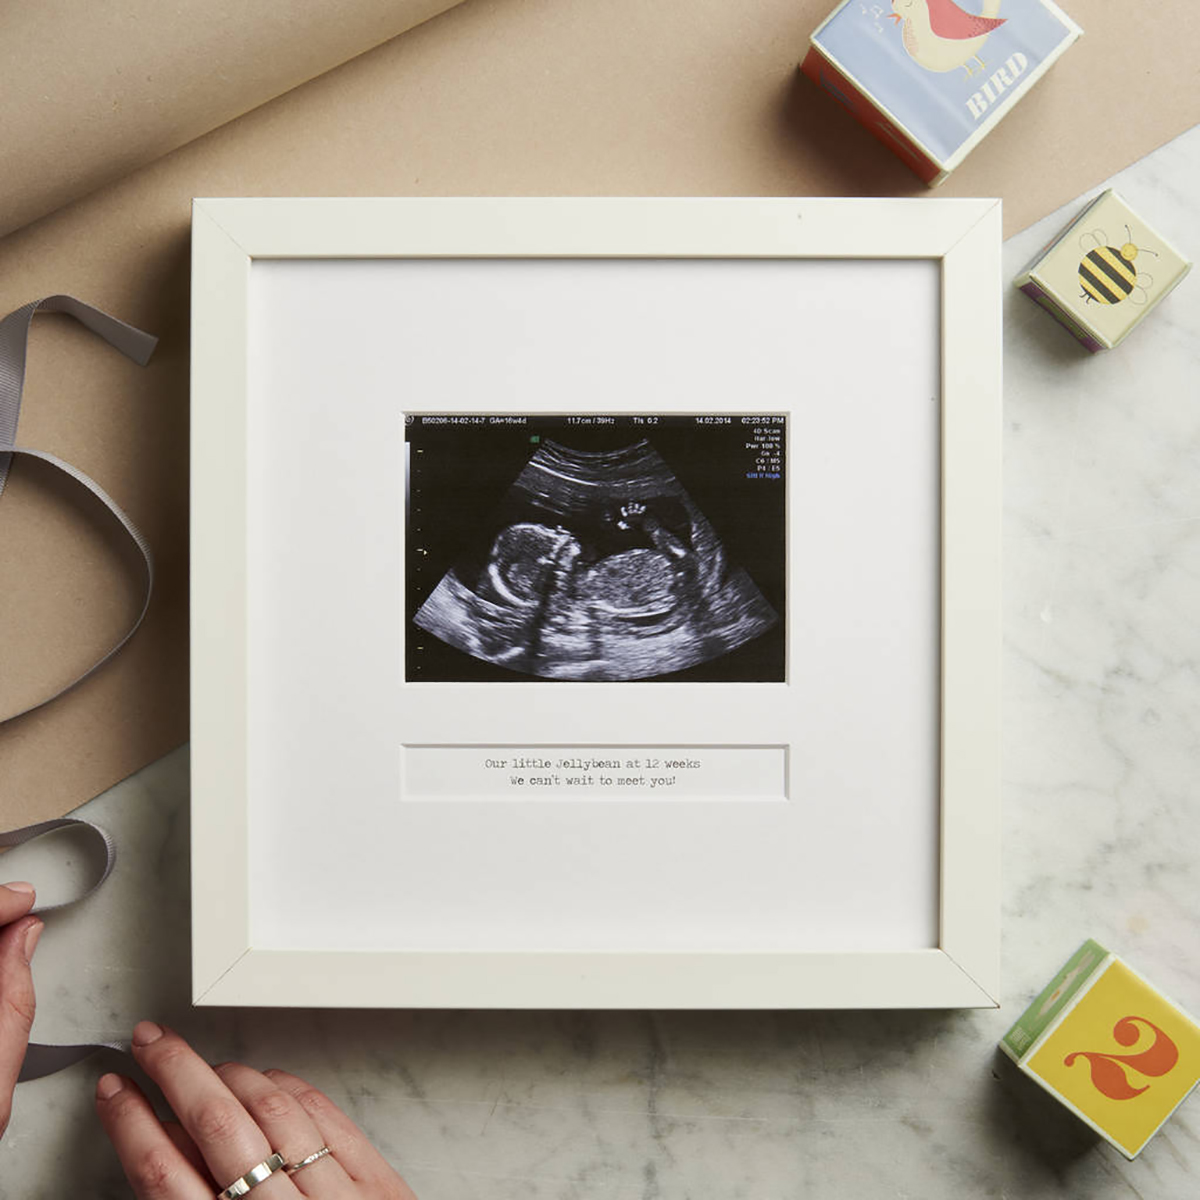 Personalised Photo Frame - My First Scan